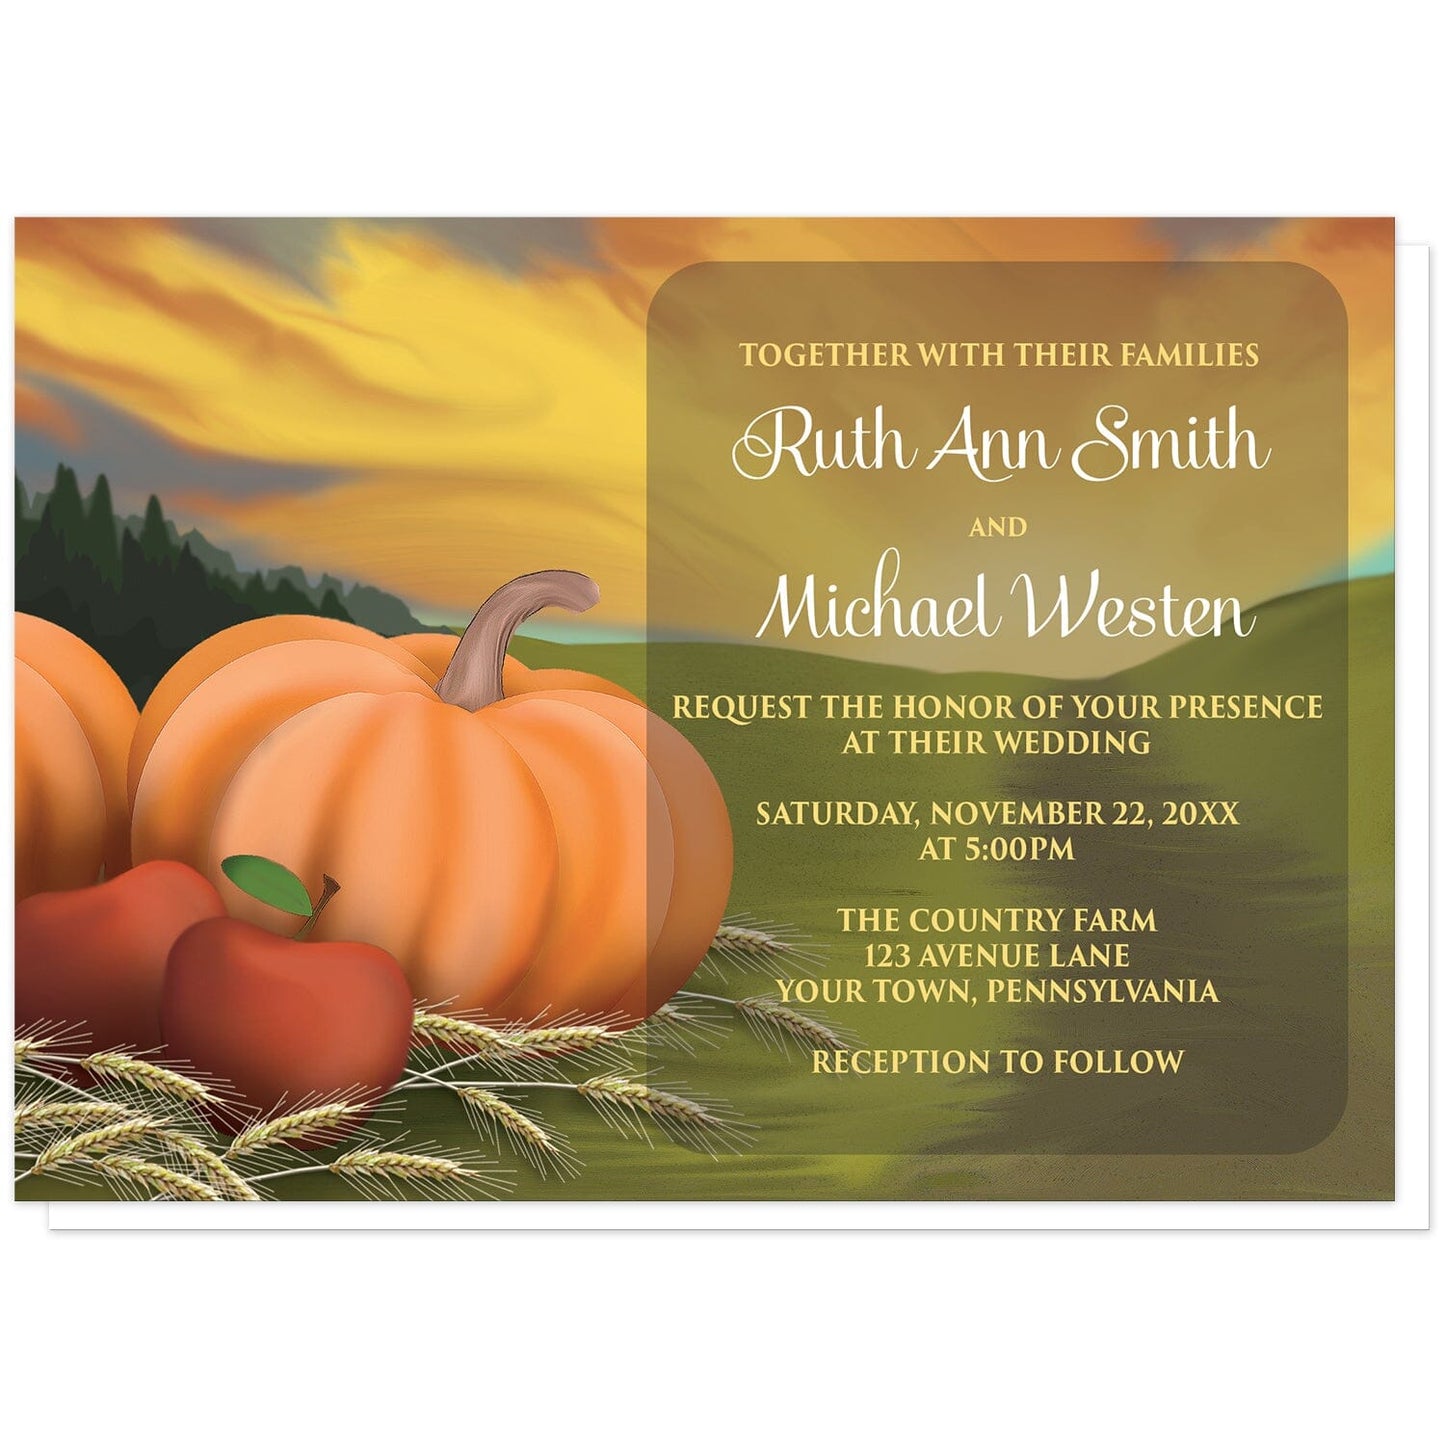 Country Autumn Harvest Wedding Invitations at Artistically Invited. Country autumn harvest wedding invitations with pumpkins, apples, and hay stems in a country farm or open fields illustration. Your personalized marriage celebration details are printed in white and yellow over a darker frame area over the scene to the right of the harvest.